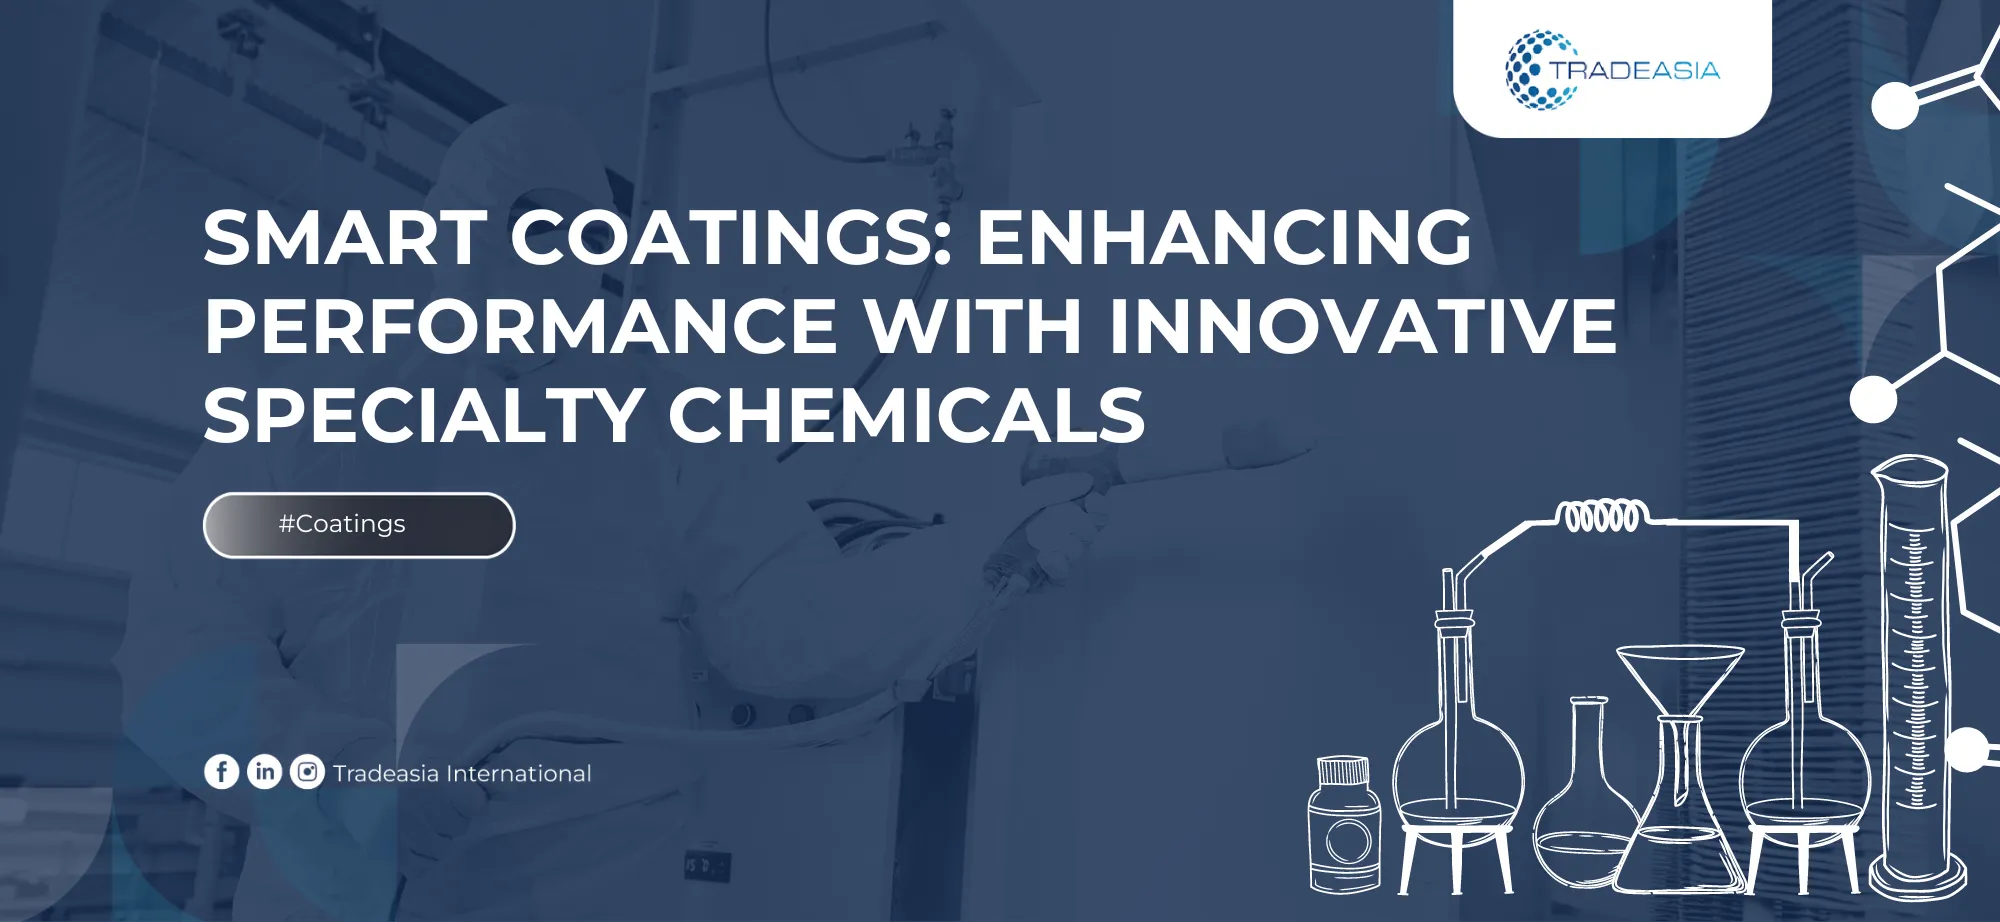 Smart Coatings: Enhancing Performance with Innovative Specialty Chemicals